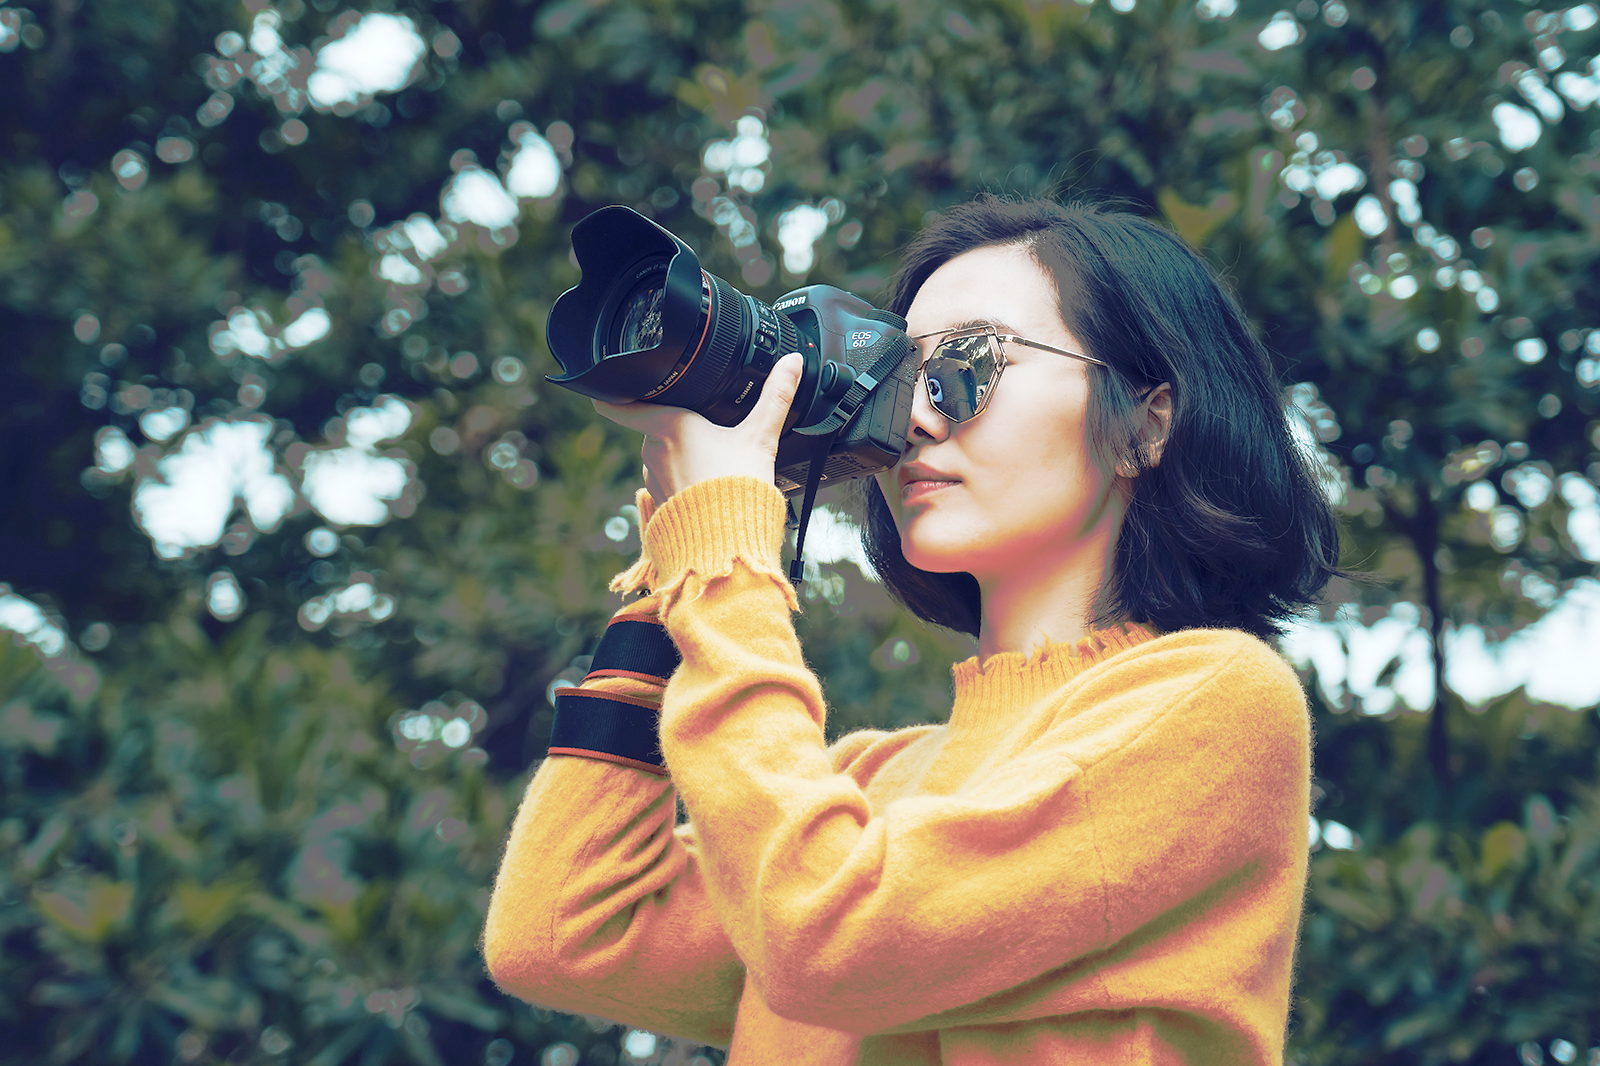 Woman wearing sunglasses taking a photo with a professional camera outdoors.